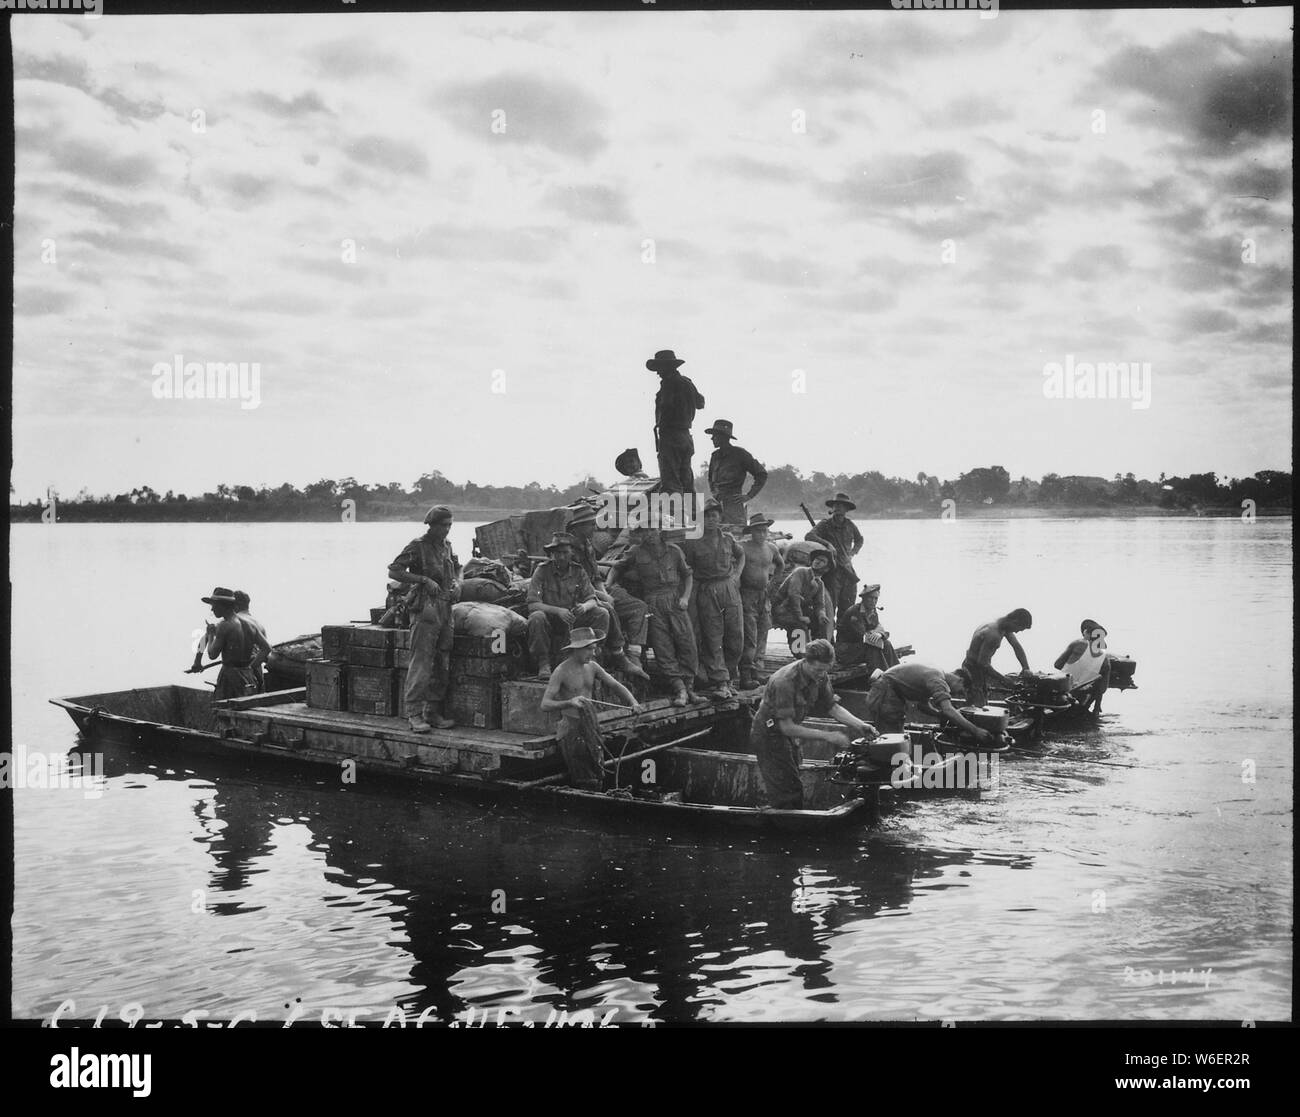 A barge, powered by outboard motors, crosses the Irrawaddy River near Tigyiang, Burma. The men, their truck and ammunition all make the crossing at once in this way.; General notes:  Use War and Conflict Number 1157 when ordering a reproduction or requesting information about this image. Stock Photo